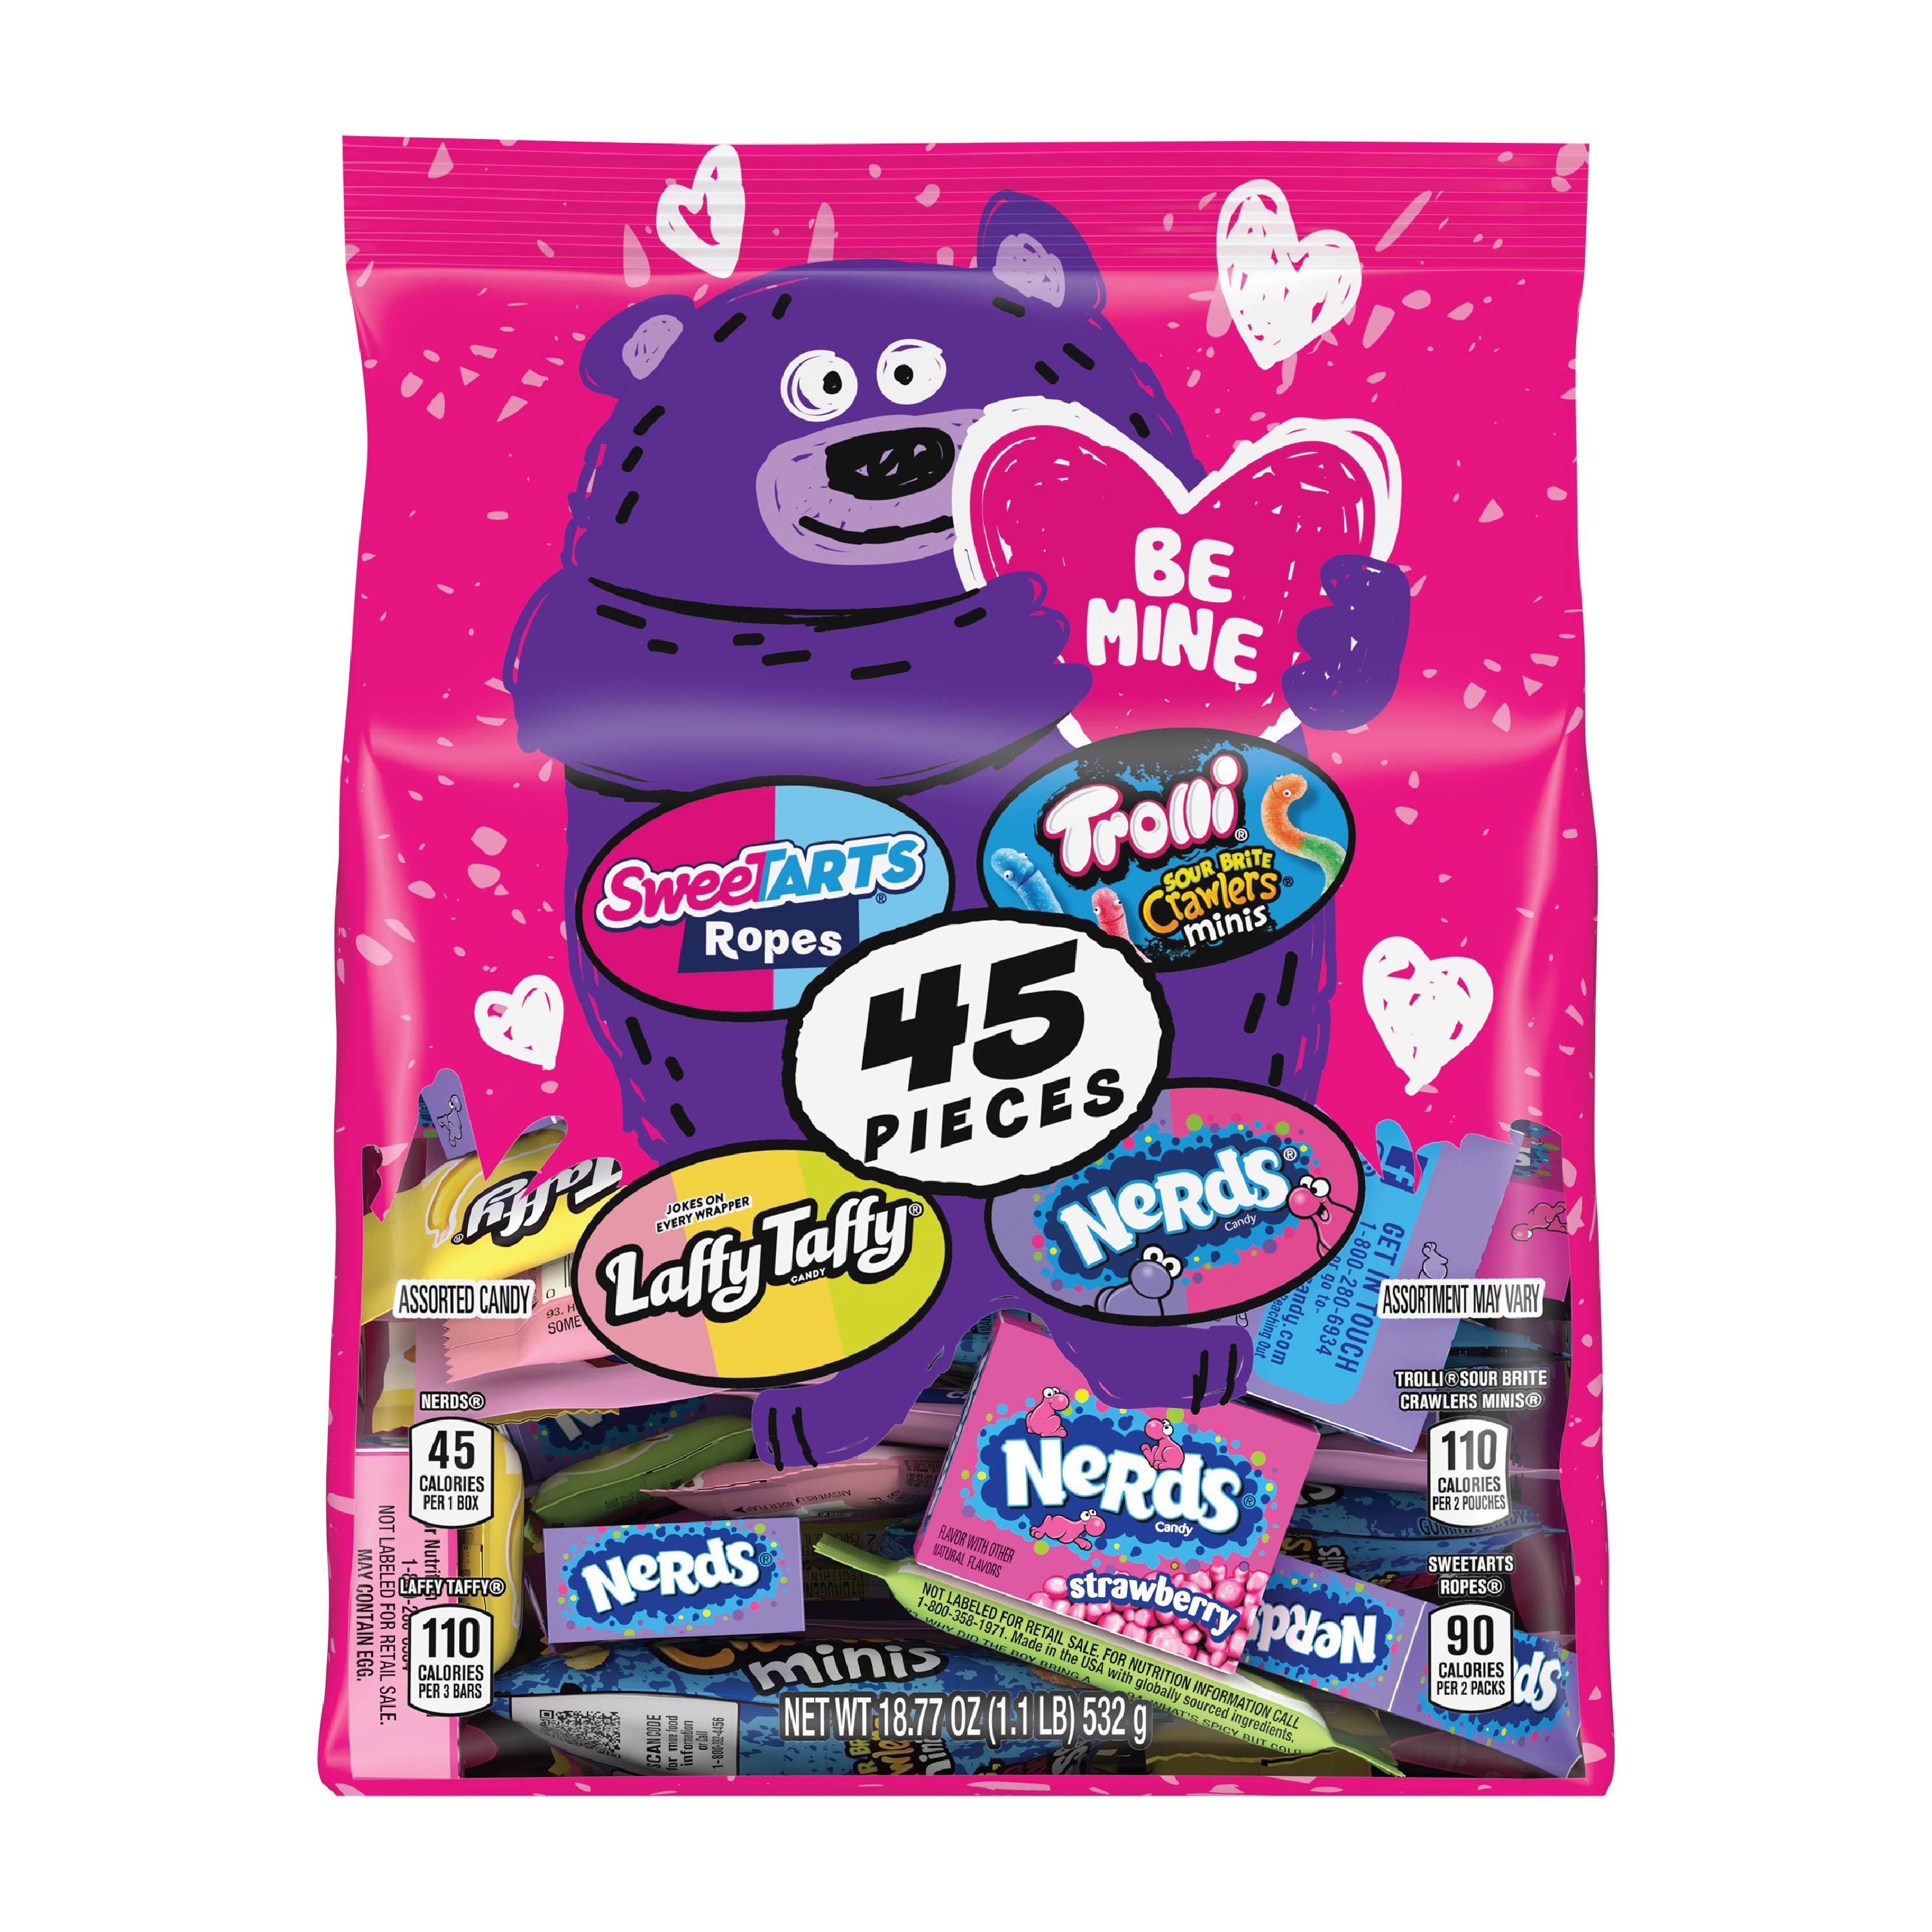 Valentine's Day "Be Mine" Friendship Exchange Fruity Candy Mix, 45 Count - image 1 of 9